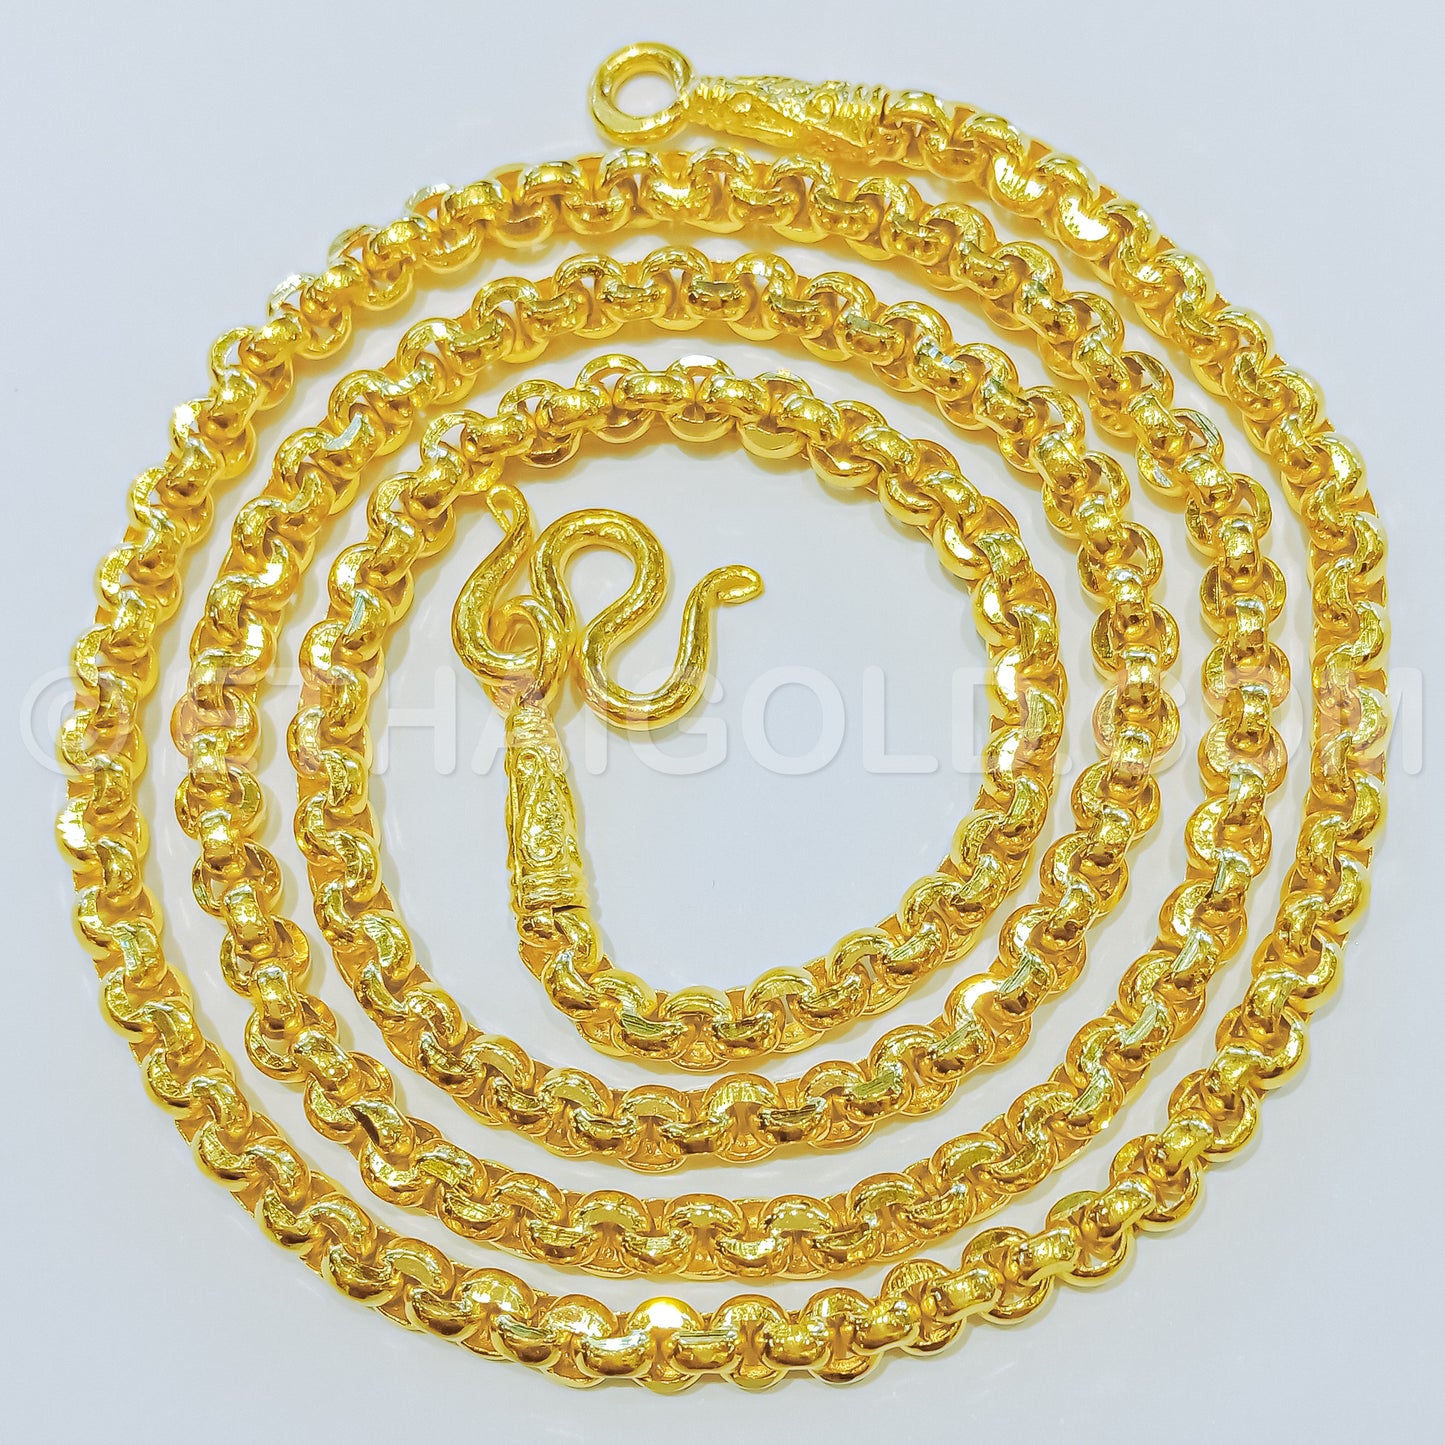 1/2 BAHT POLISHED DIAMOND-CUT SOLID ROLO CHAIN NECKLACE IN 23K GOLD (ID: N2502S)